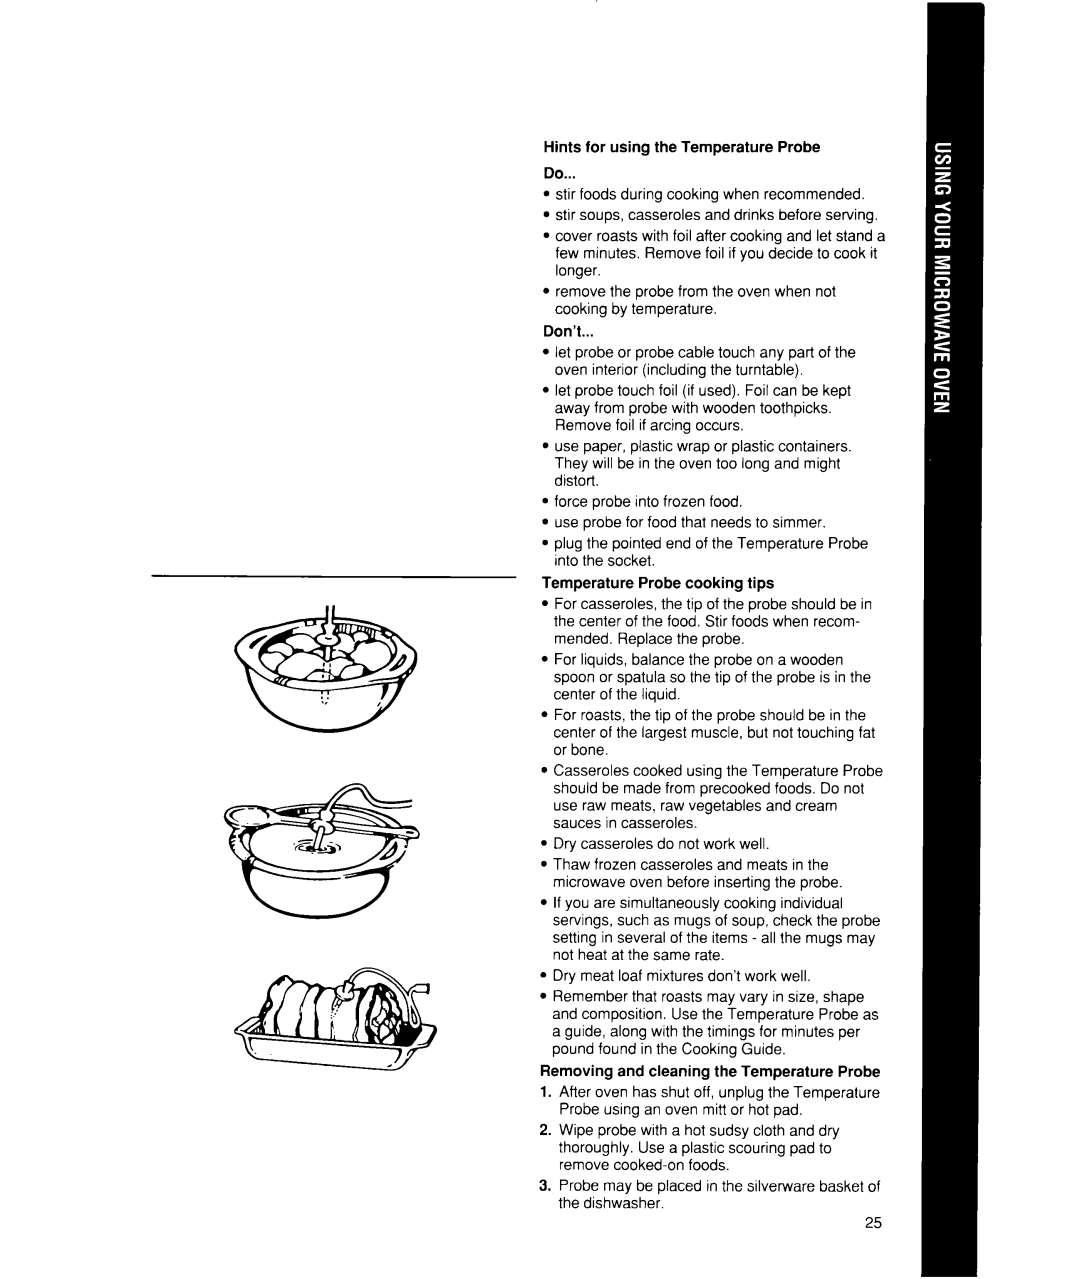 Whirlpool MW7500XW manual Hints for using the Temperature Probe Do 